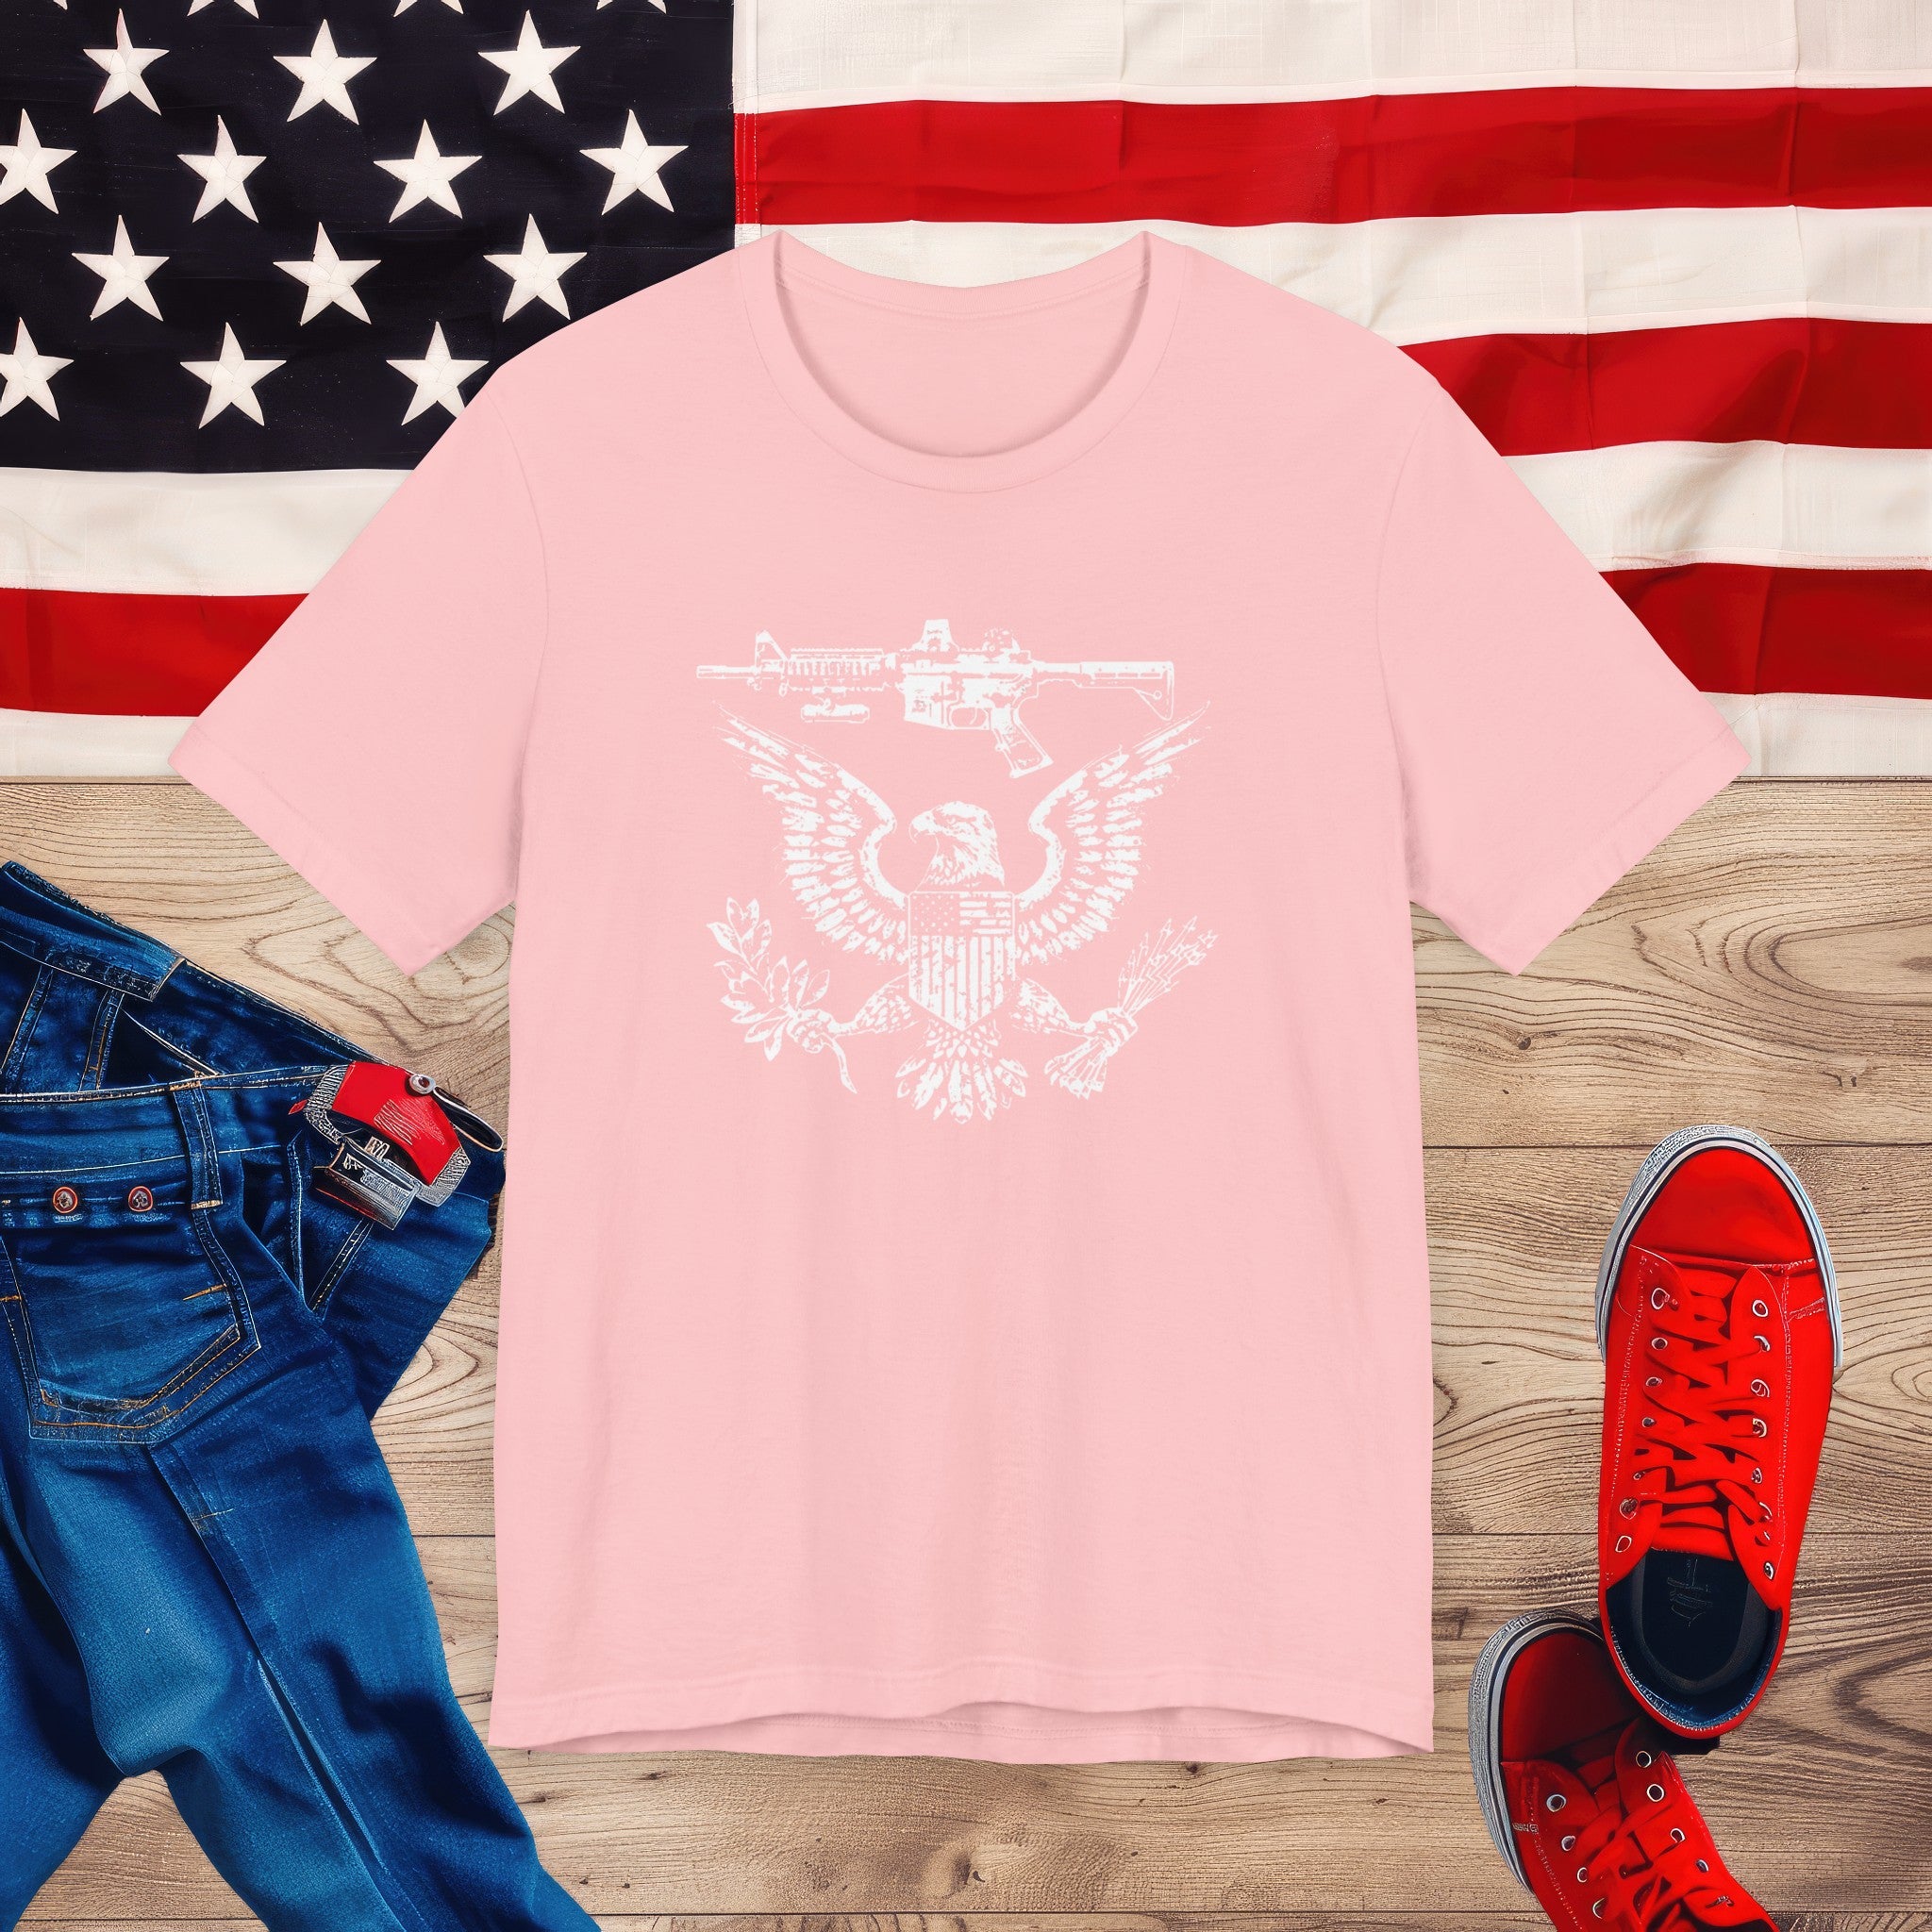 Patriotic Eagle and Rifle T-Shirt, American Flag Inspired Military Graphic Tee, Bold Eagle & Rifle Design, Proud USA Themed Apparel Unisex Jersey Short Sleeve Tee